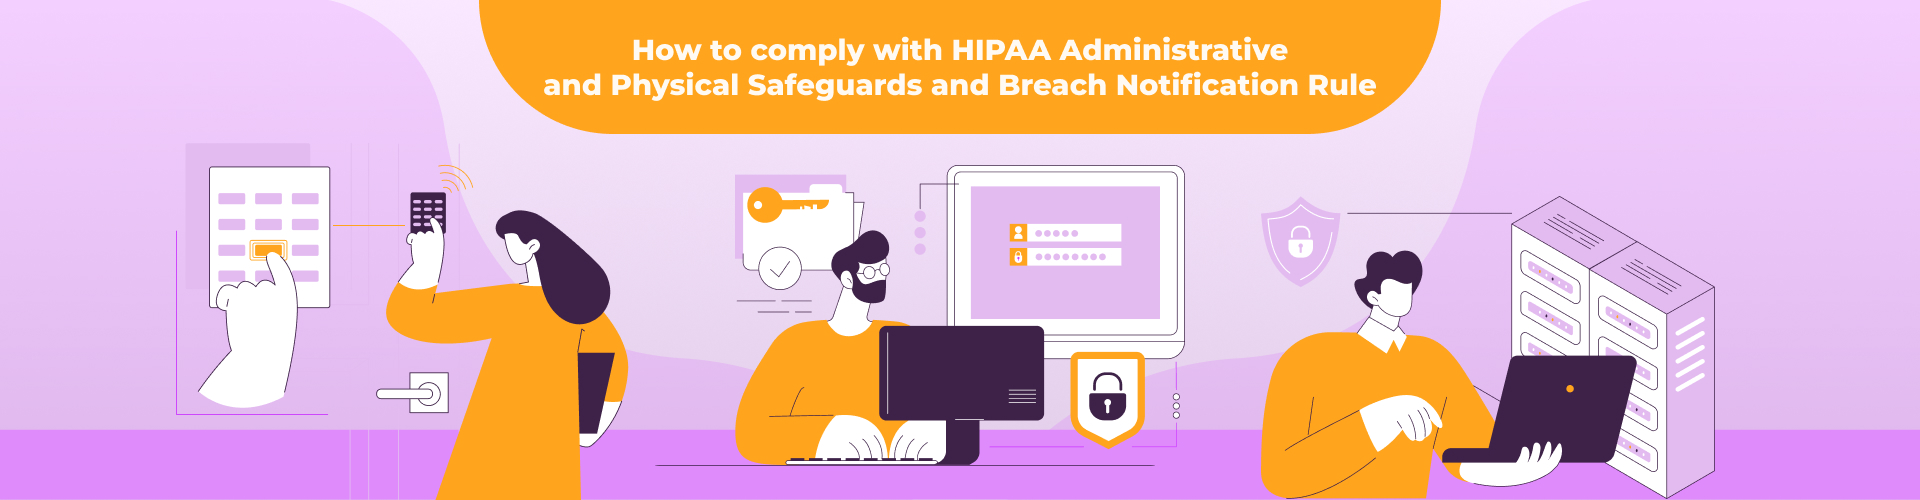 How to comply with HIPAA Administrative and Physical Safeguards